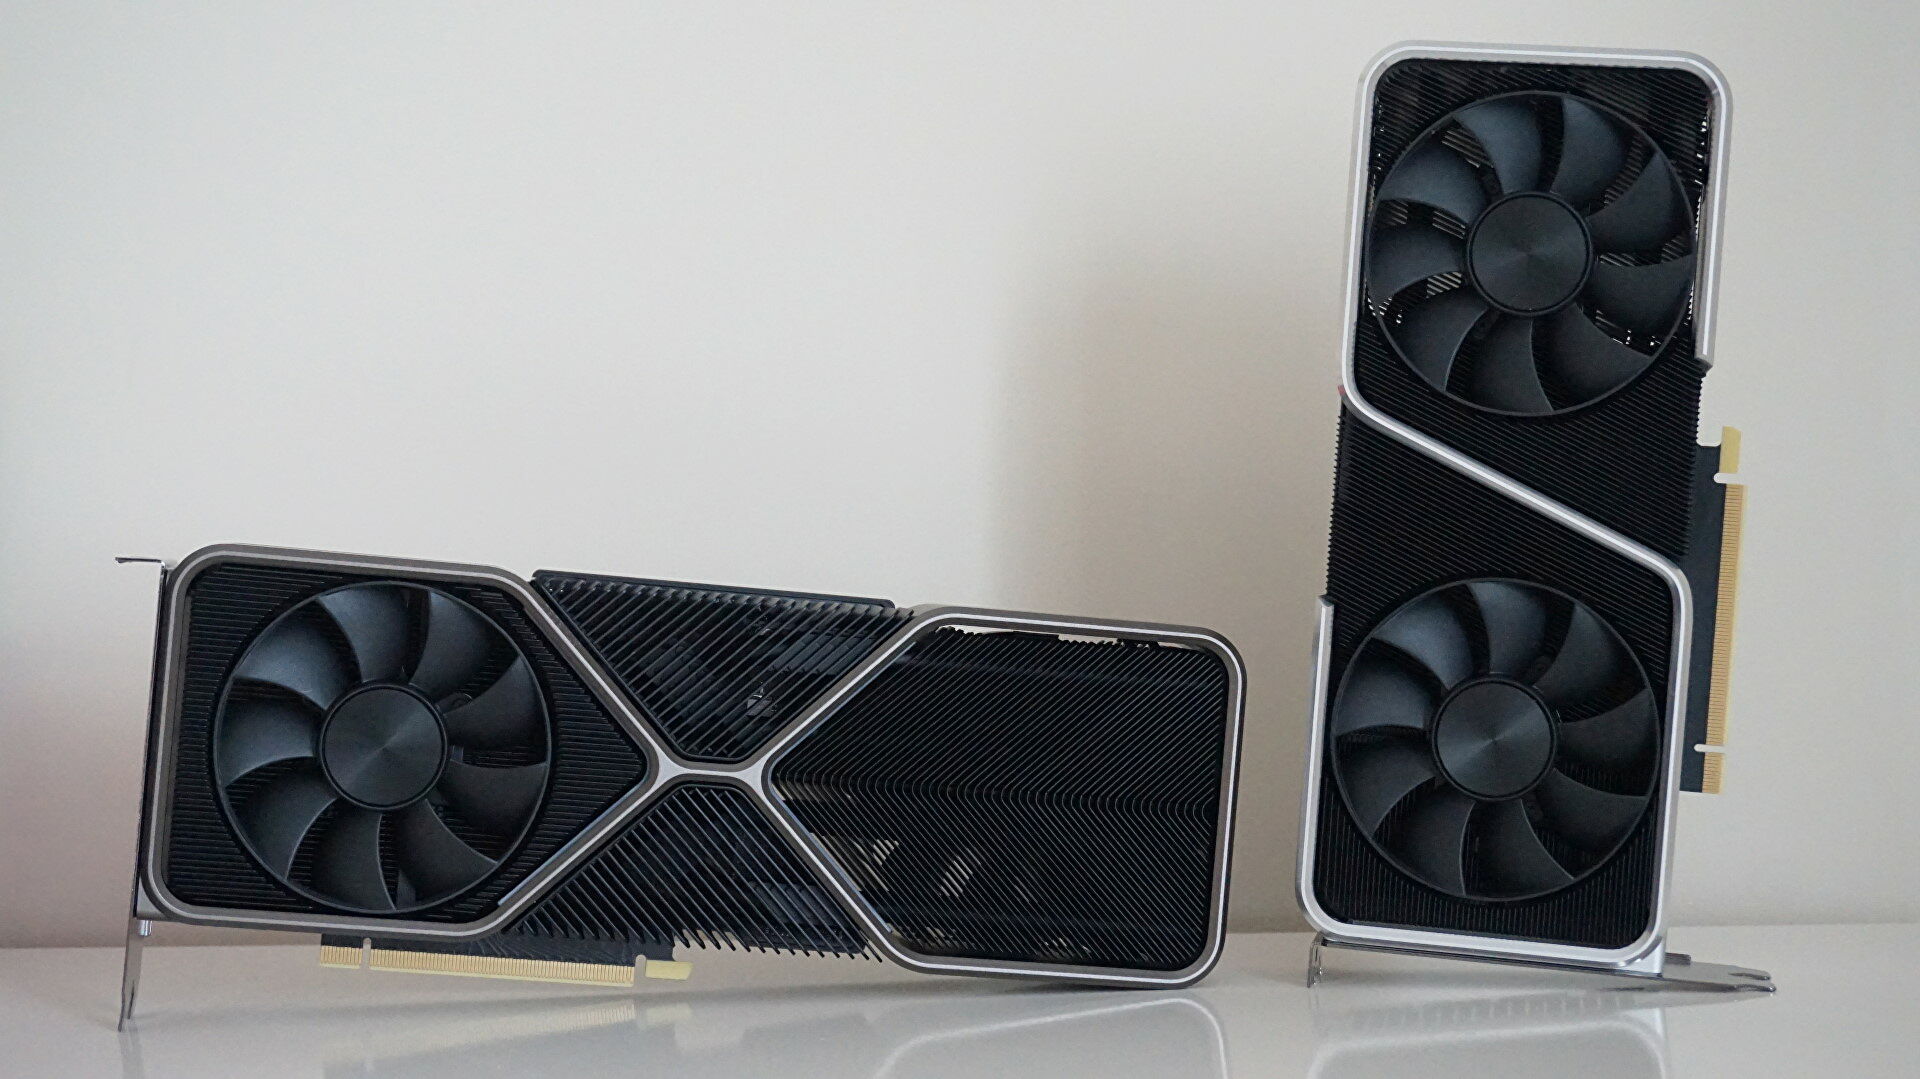 Nvidia RTX 3060 Ti and RTX 3070 Founders Edition graphics cards are in stock in the UK